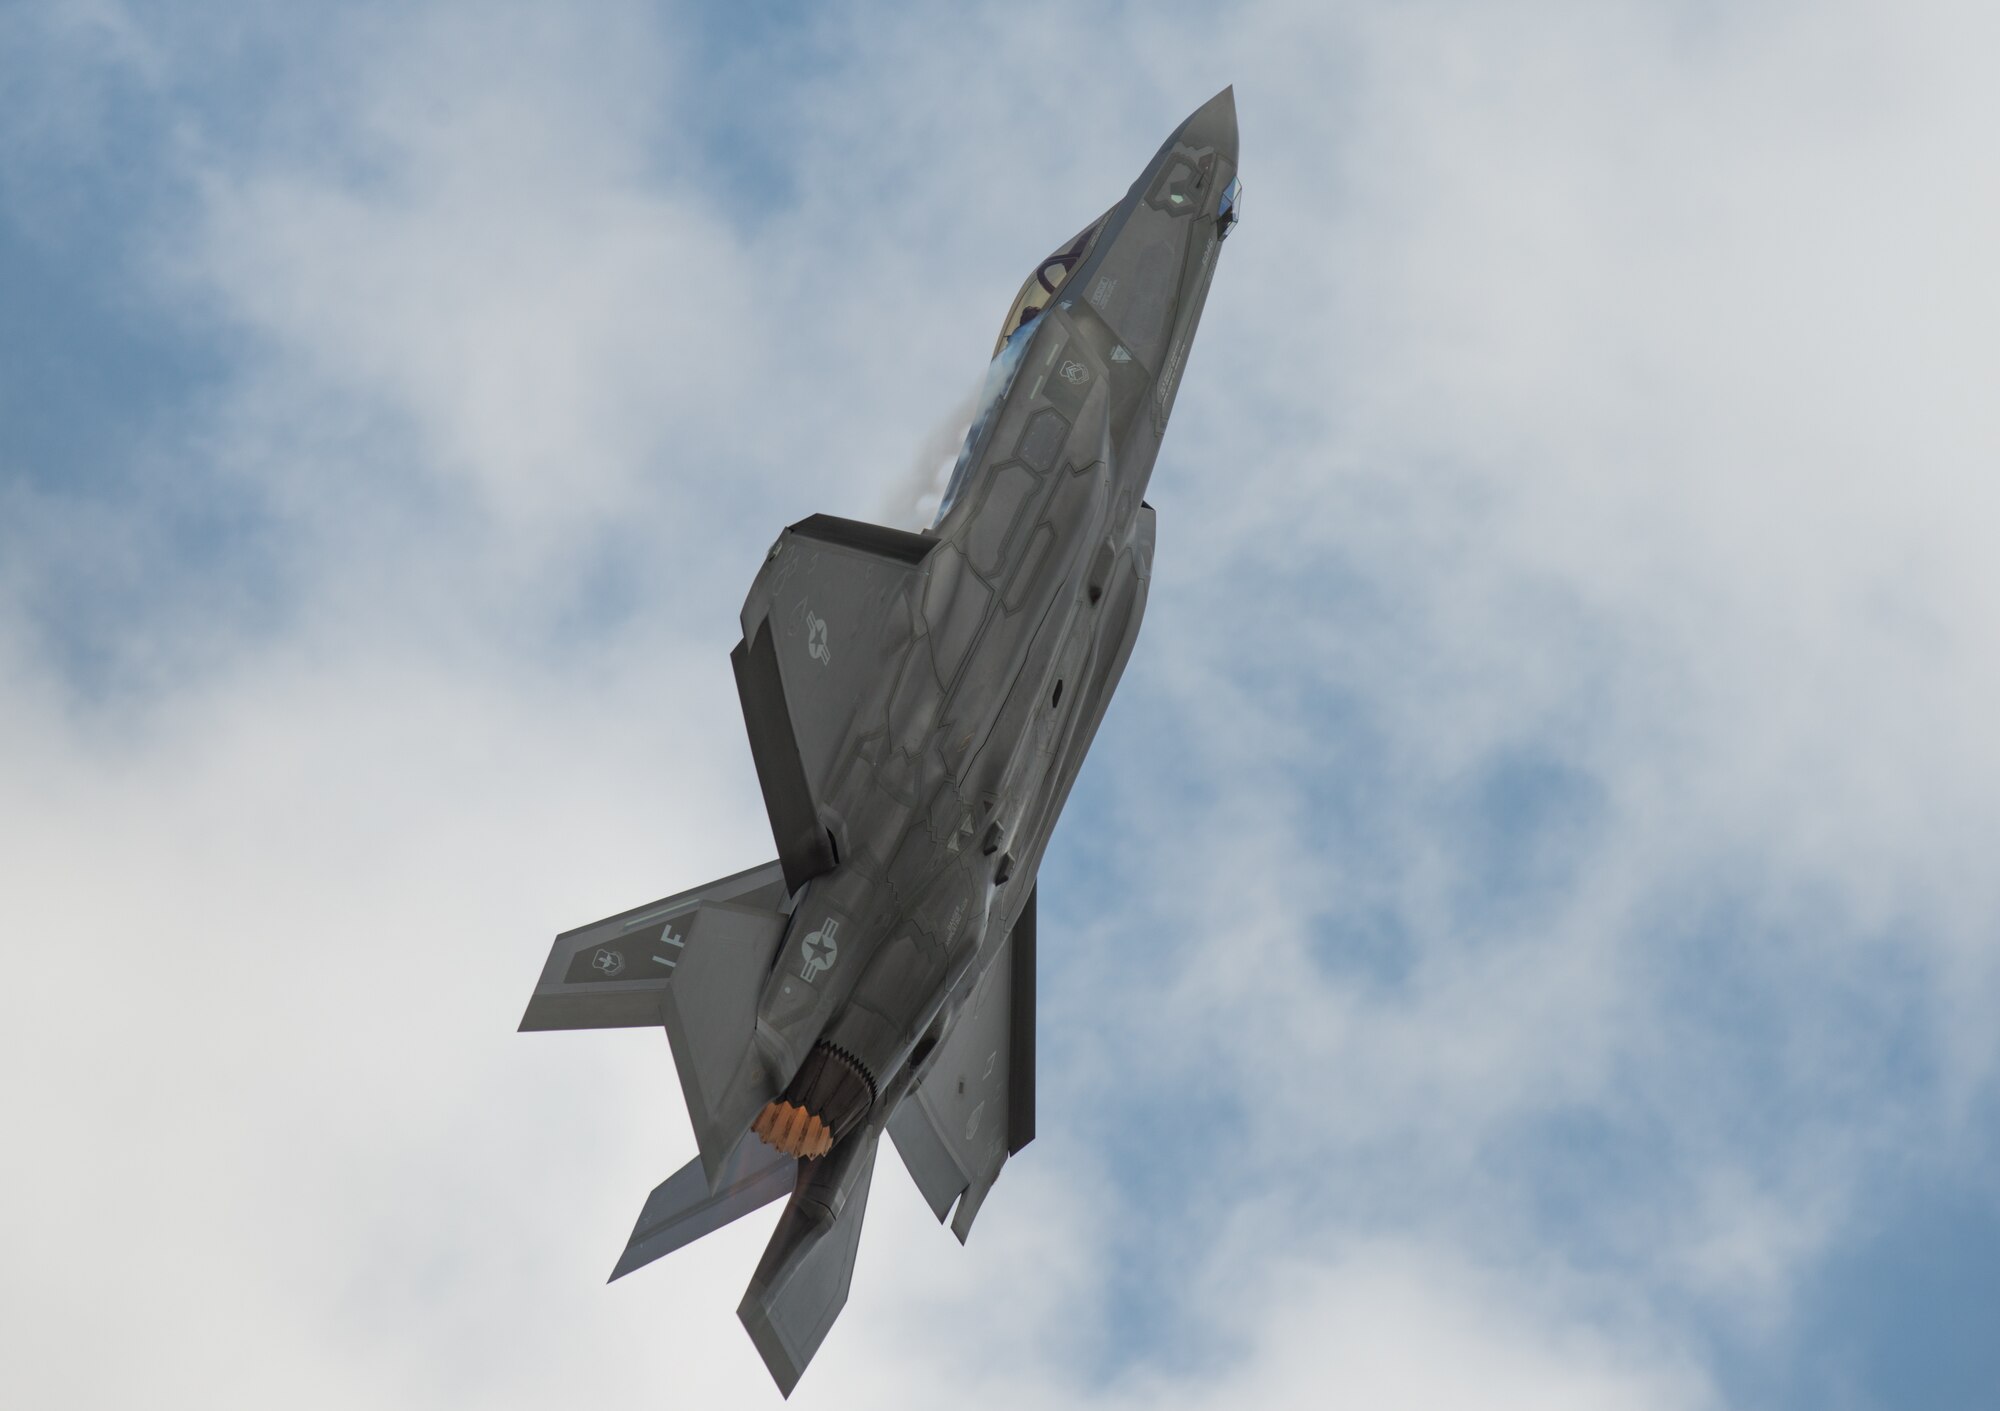 Capt. Andrew “Dojo” Olson performs aerial maneuvers flying the F-35A Lightning II during the Wings Over South Texas air show at Naval Air Station Kingsville, Texas, March 24, 2018. The F-35 is the world’s most technologically advanced fifth-generation fighter aircraft. (U.S. Air Force photo by Airman 1st Class Alexander Cook)